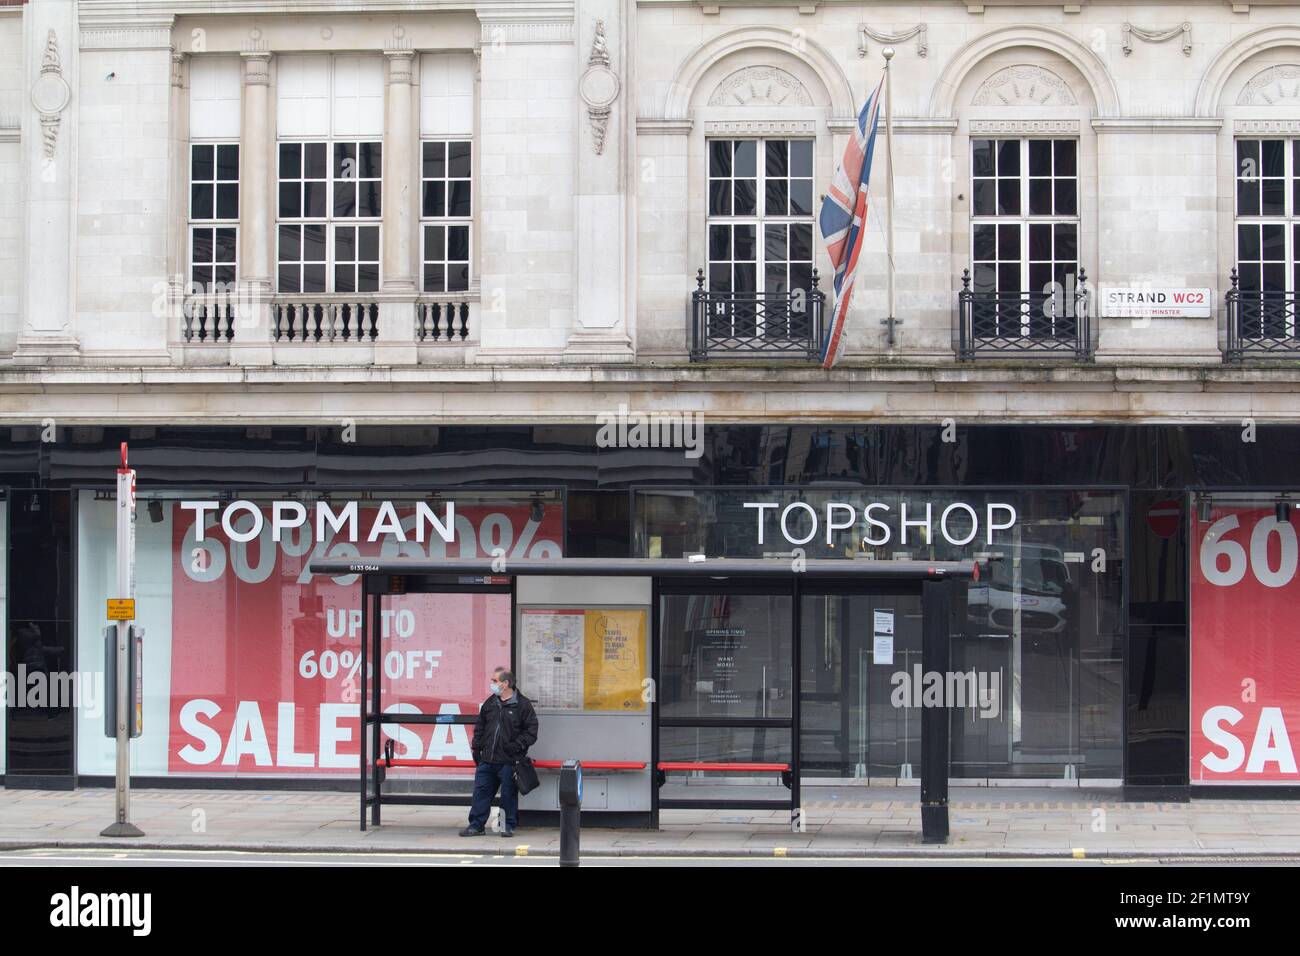 Closed shops in London, Topshop and Topman branch with bus stop in foreground with man wearing PPE mask, Strand, London ex subsidiary of the Arcadia Group went into administration in late 2020. The brand was sold to ASOS  in February 2021 Stock Photo